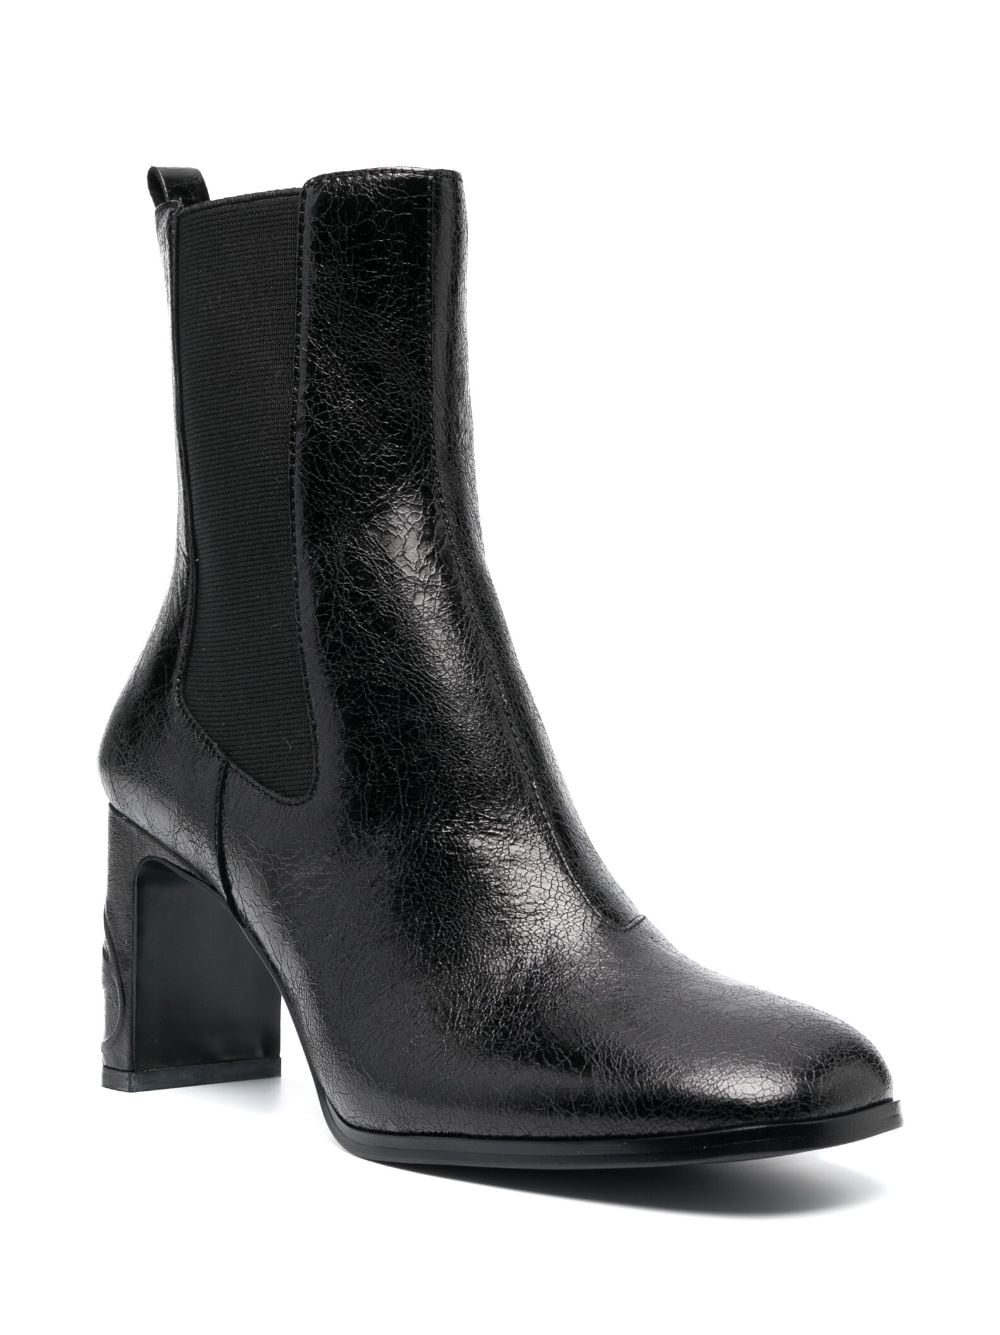 D-GIOVE AB 75mm ankle boots - 2